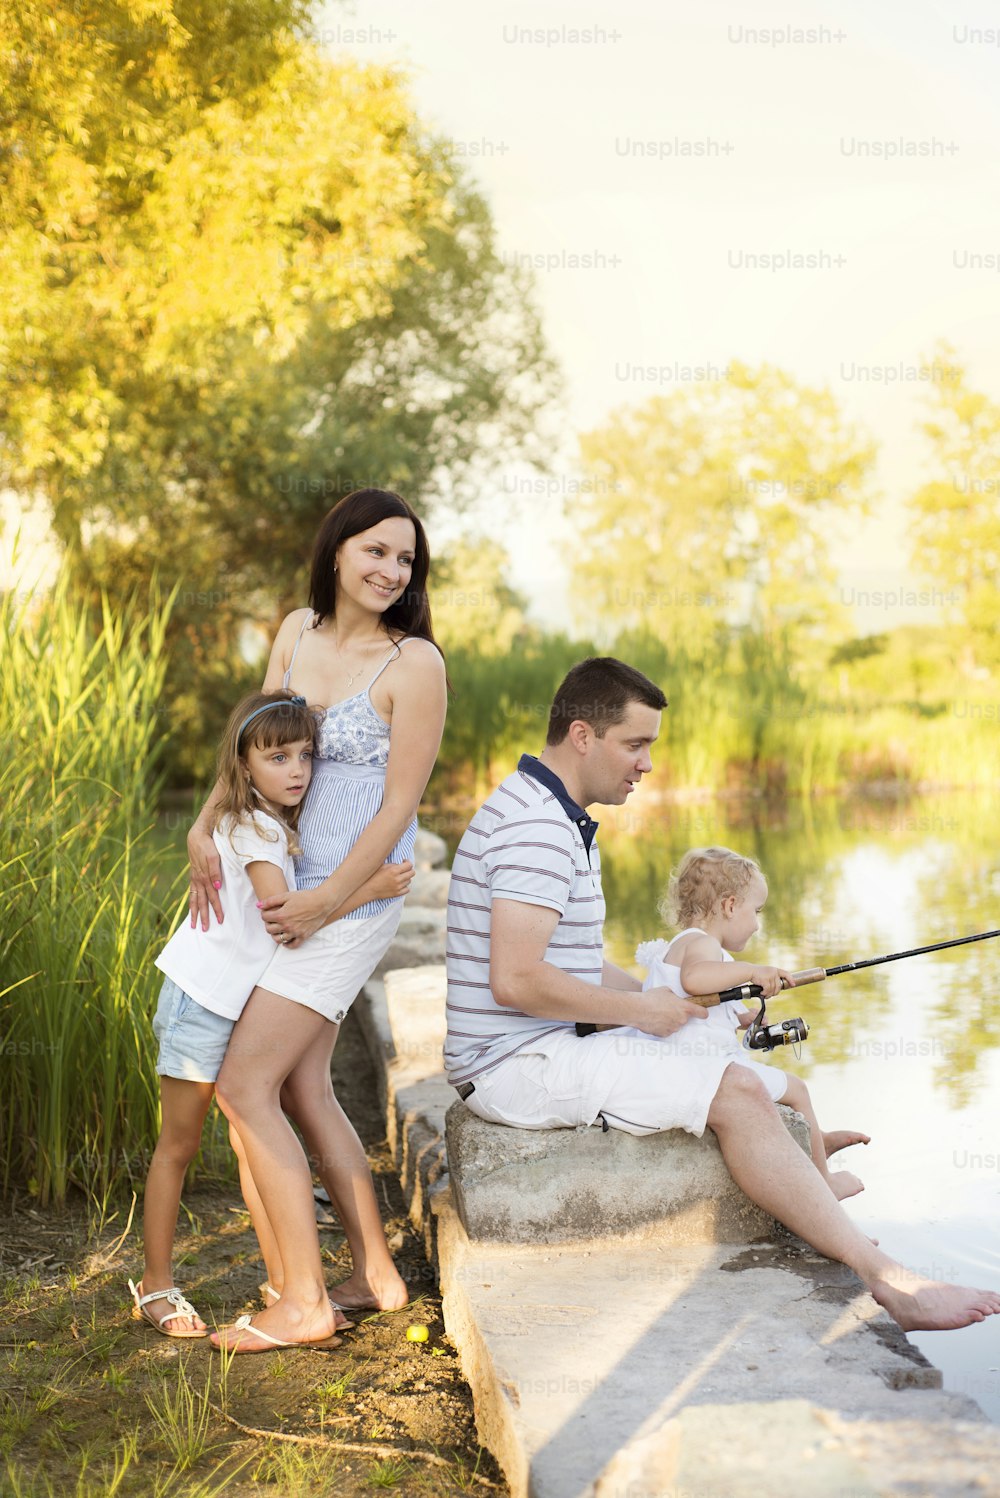 Young happy family with kids fishing in pond in summer